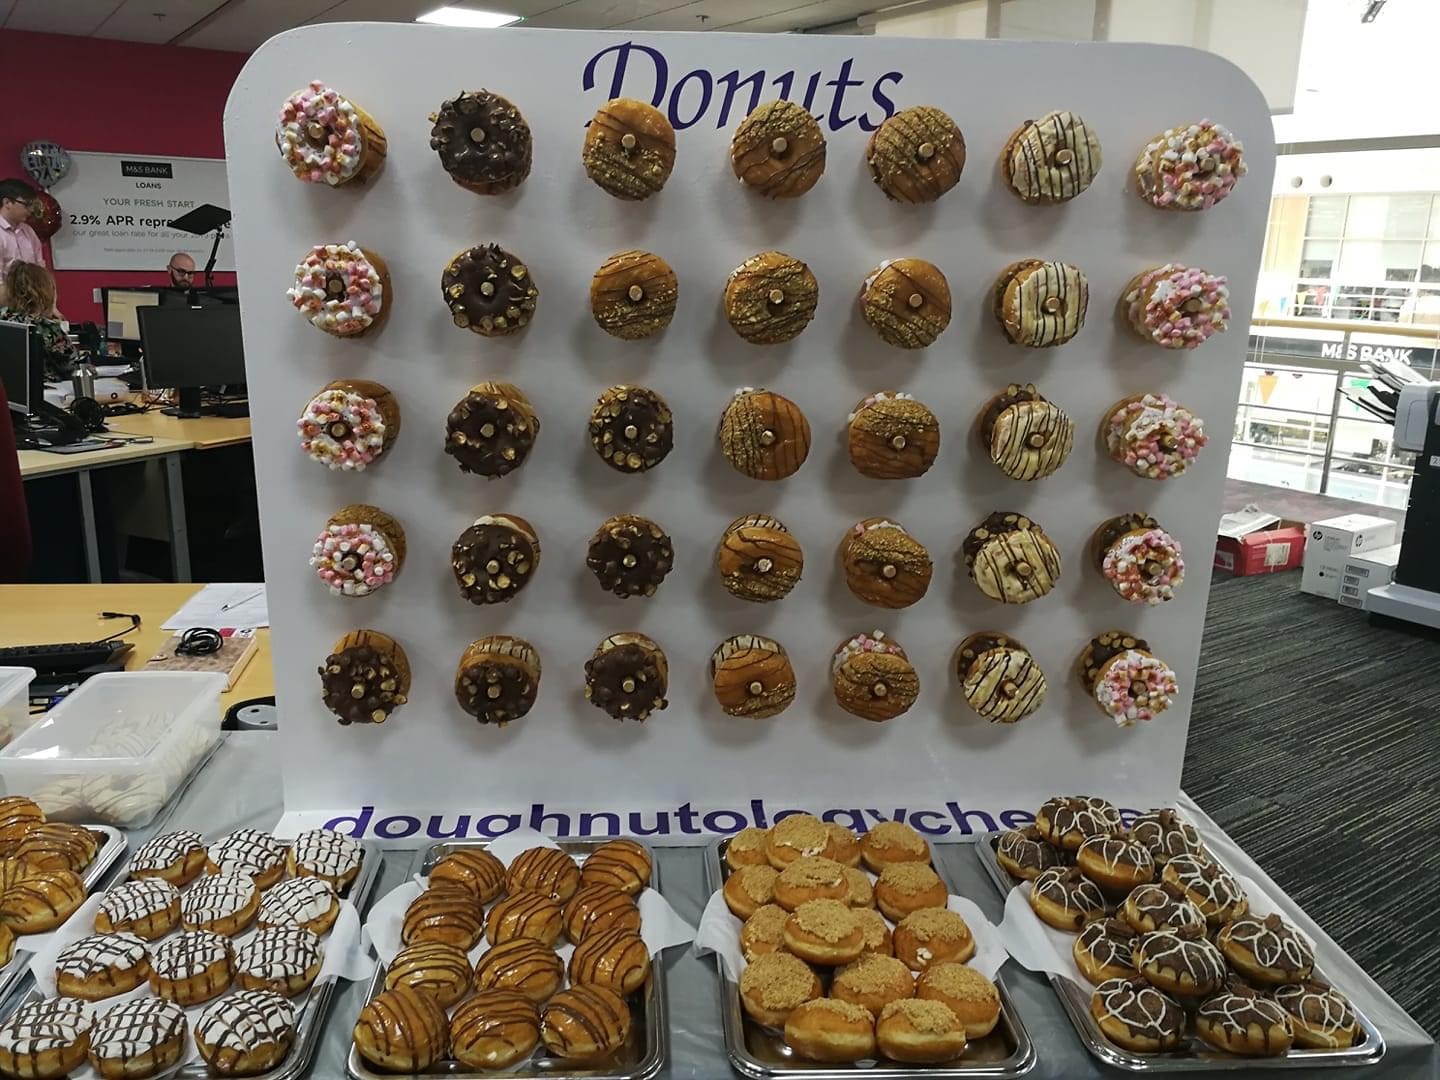 Doughnutology, that covers Wrexham, Flintshire and Chester, has been nominated for a prestigious award by Food Awards Wales. 